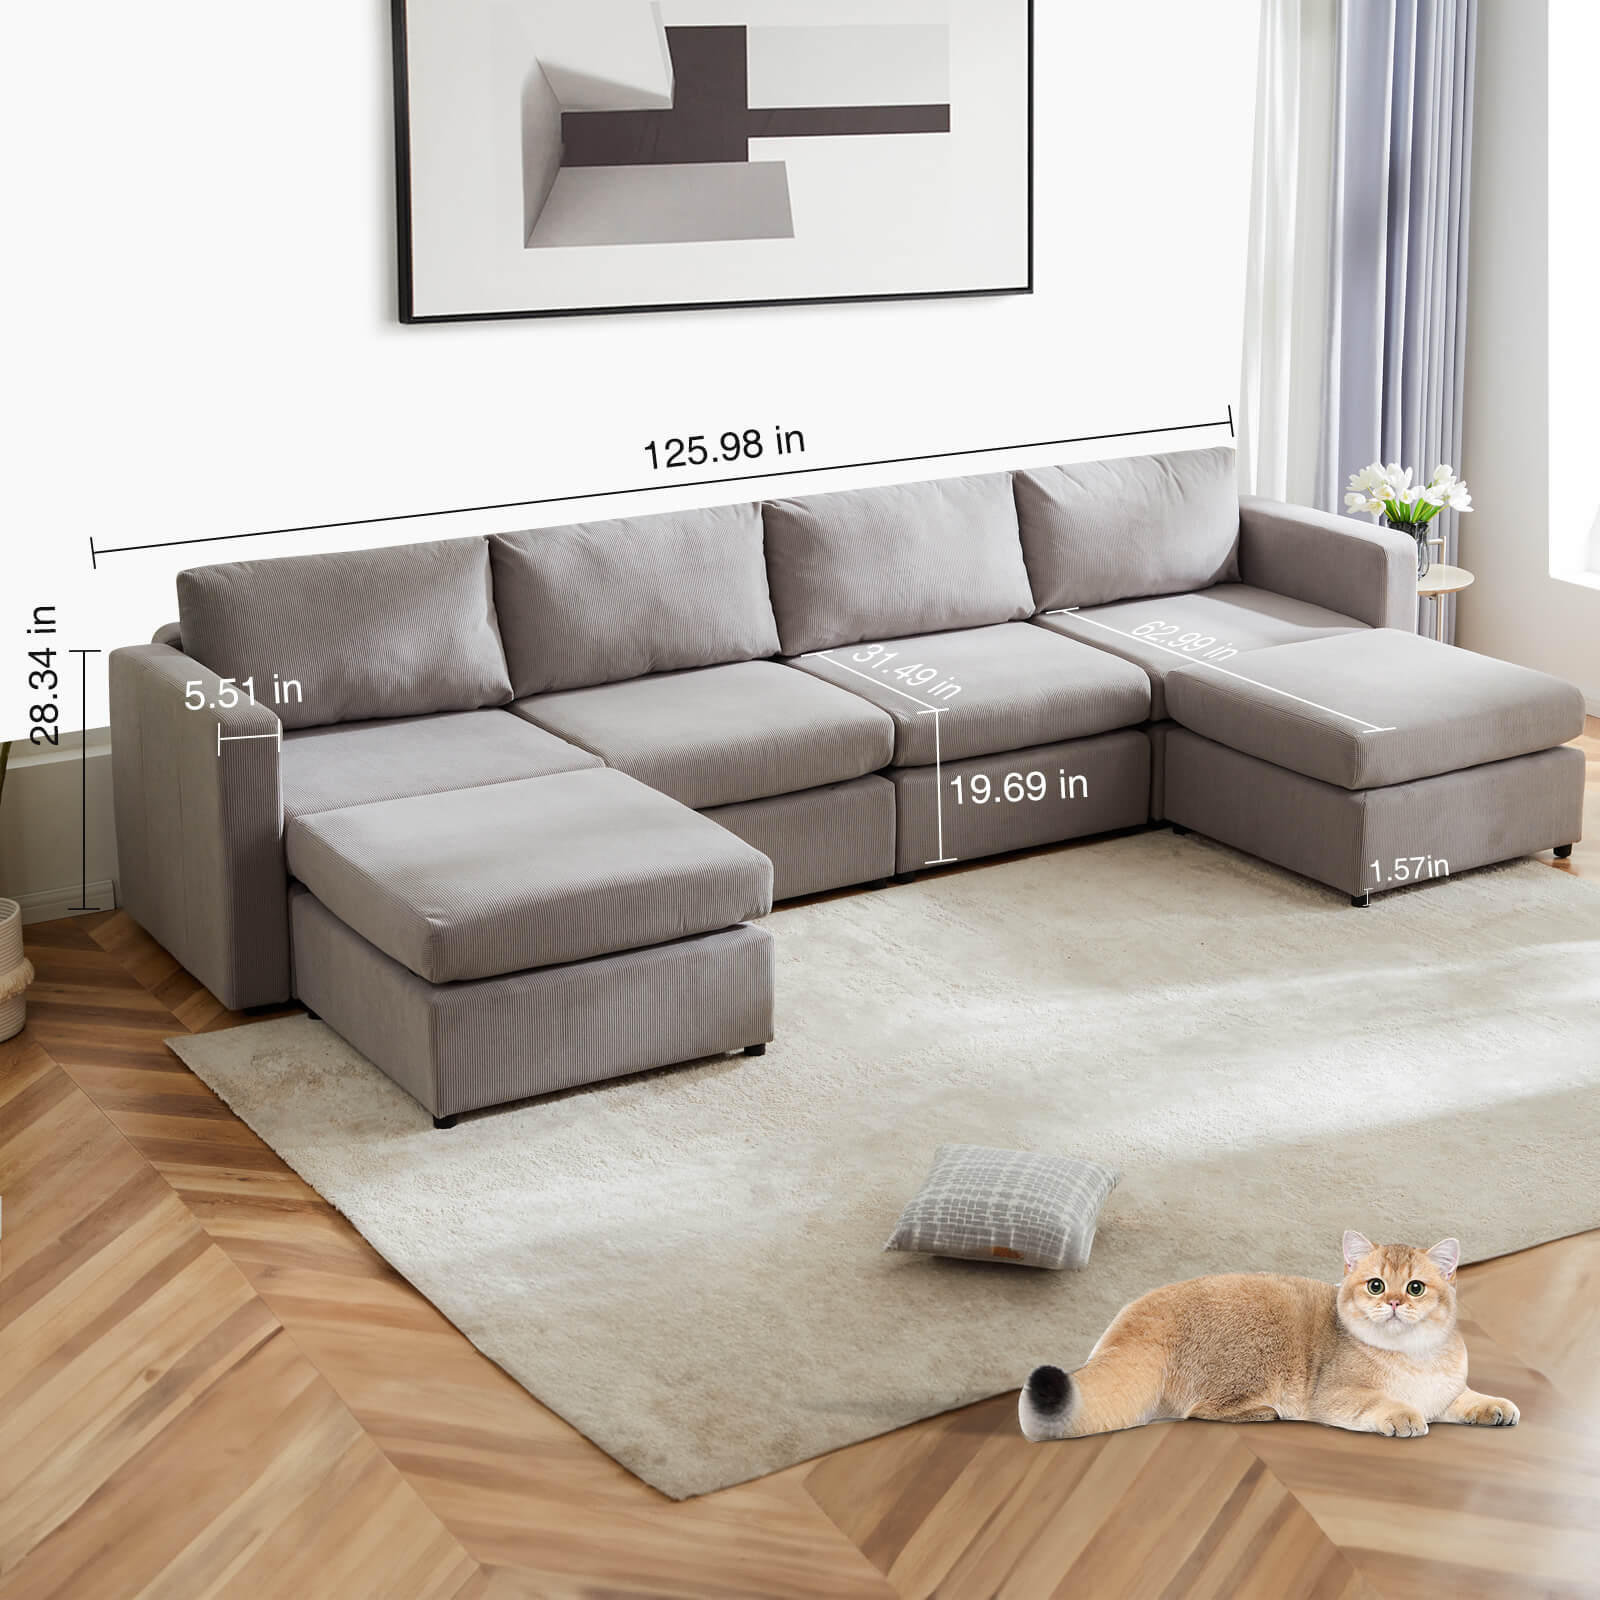 Convertible Sleeper Sofa Bed - Modular Sectional Sofa Set for Living Room, for office, living room, bedroom